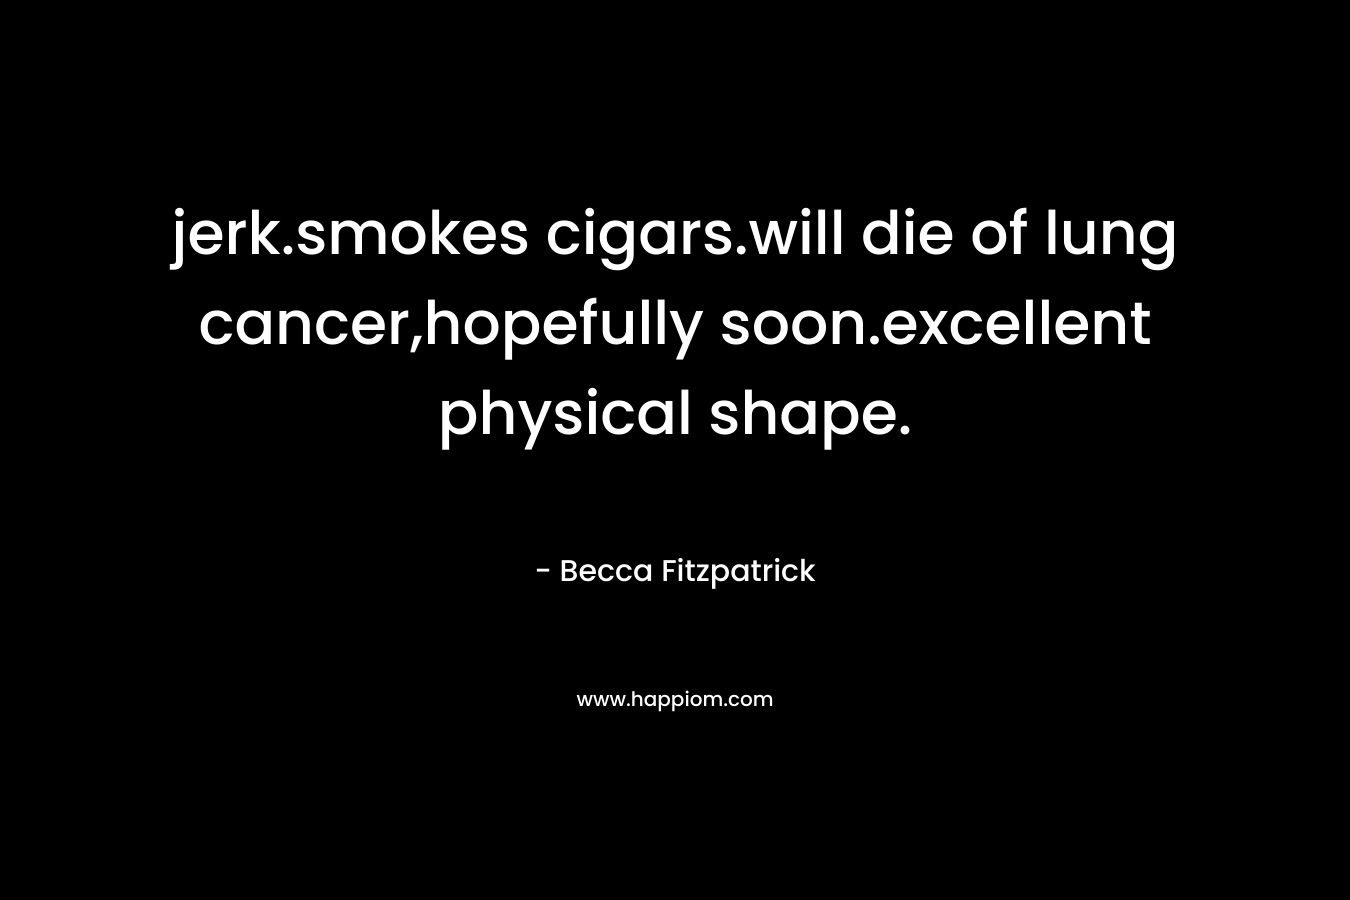 jerk.smokes cigars.will die of lung cancer,hopefully soon.excellent physical shape.